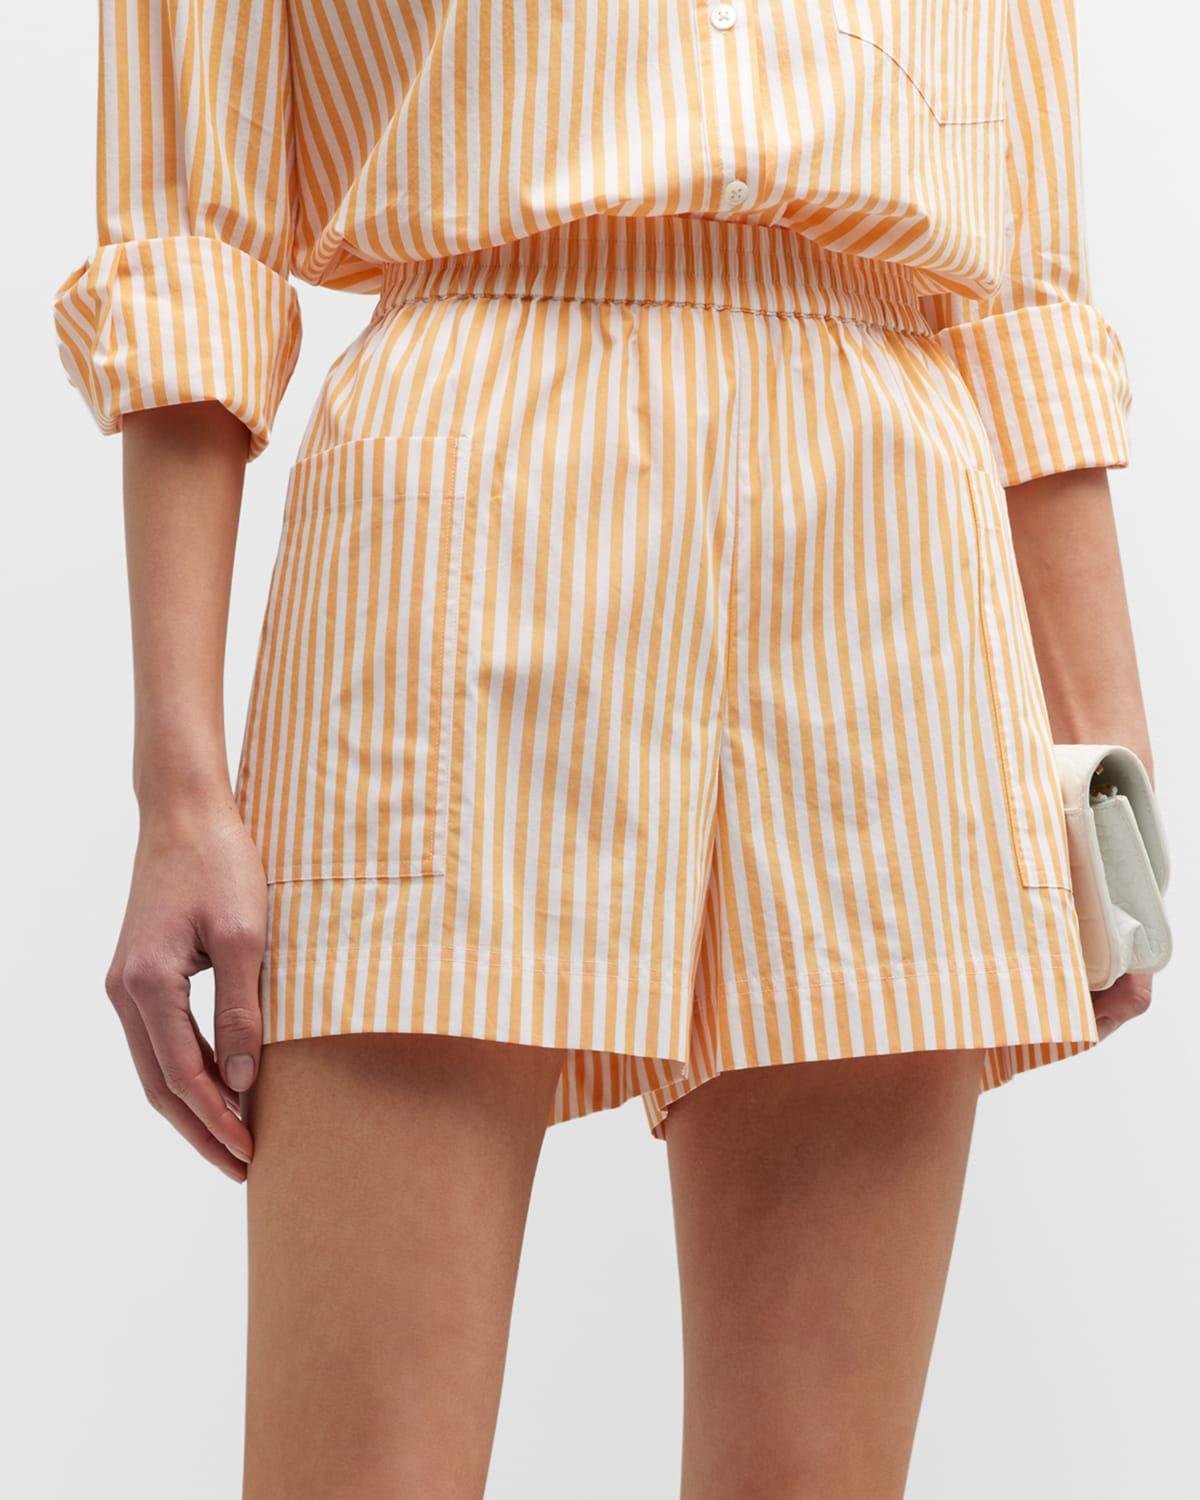 Striped Boxer Shorts by RAILS